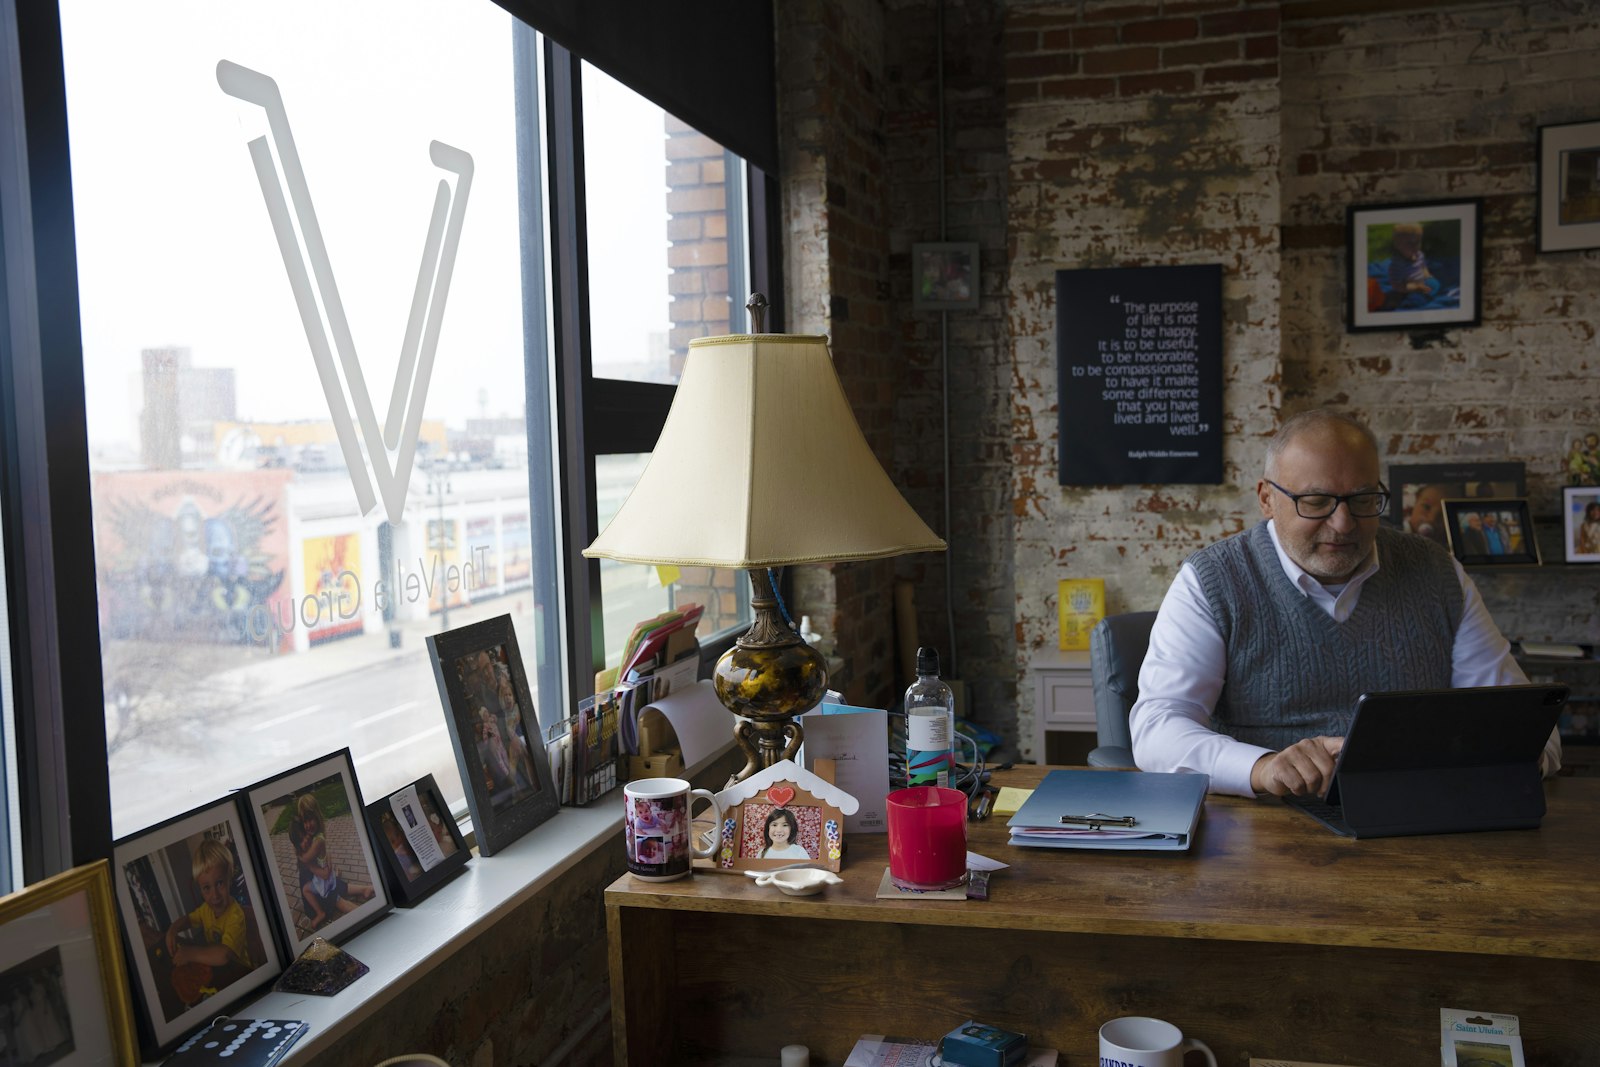 Jim Vella works from his office in Detroit's Eastern Market. Vella, the son of Maltese immigrants, grew up on Detroit's west side. He says his parents instilled the virtue of hard work from a young age, a lesson he's carried with him throughout his career, in addition to their steadfast faith.